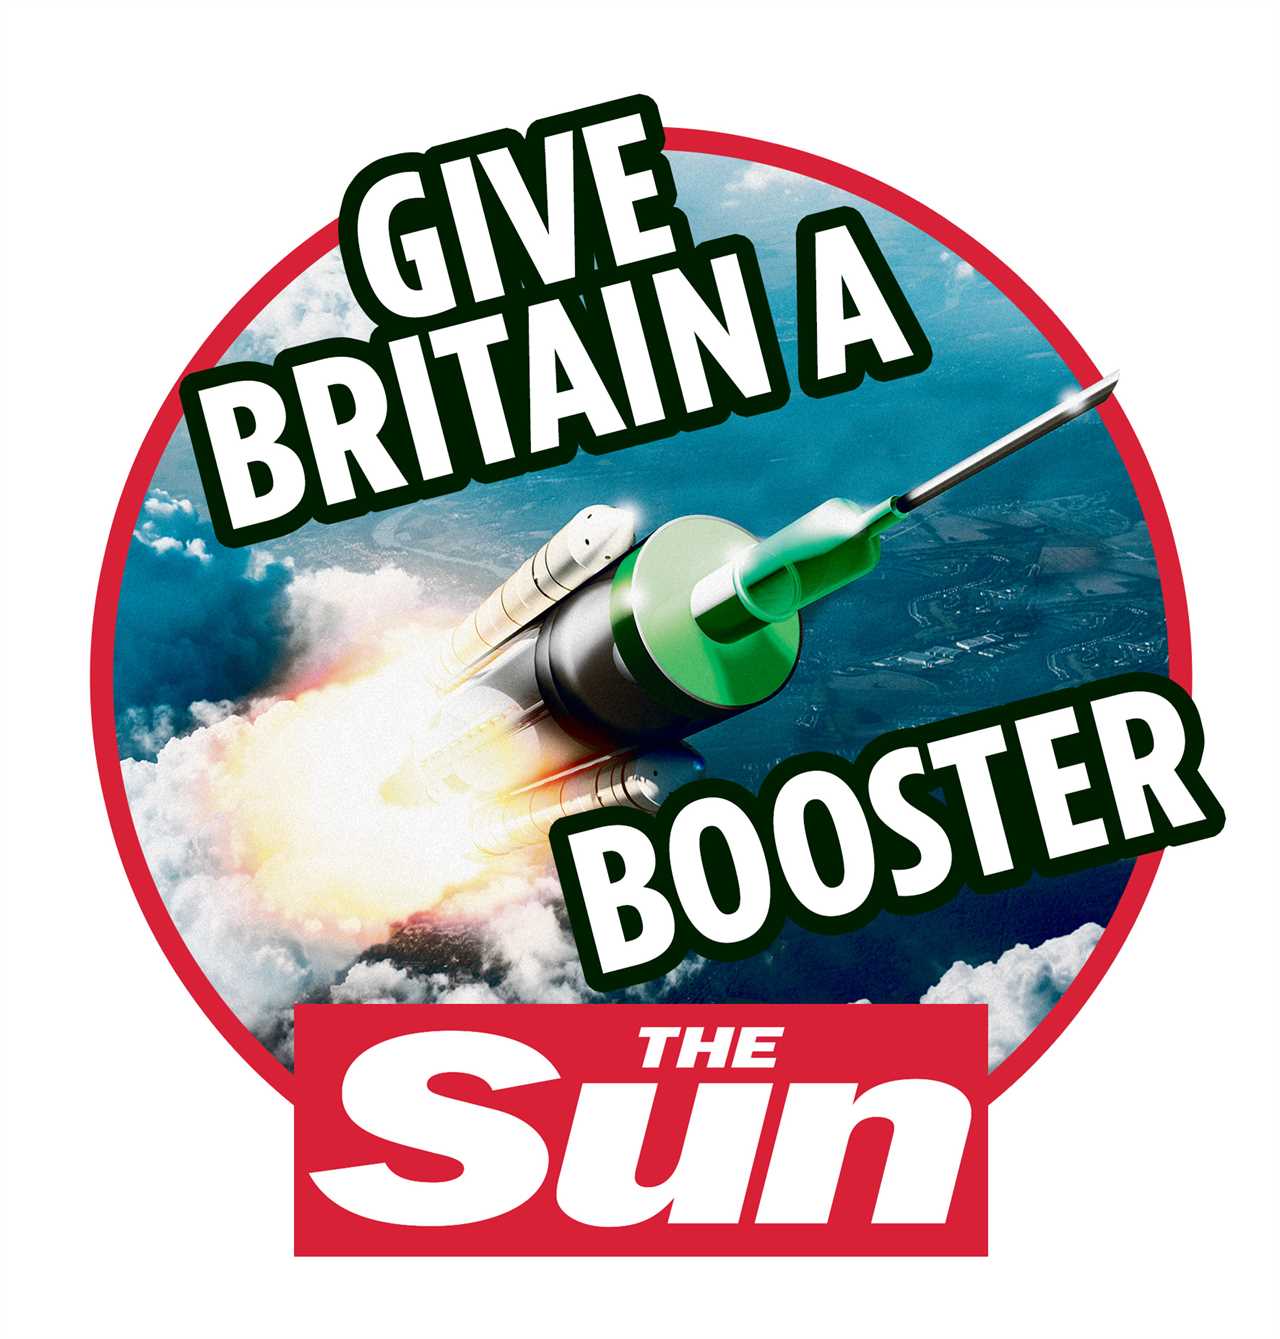 Get your booster jab to save lives and keep our freedoms this winter